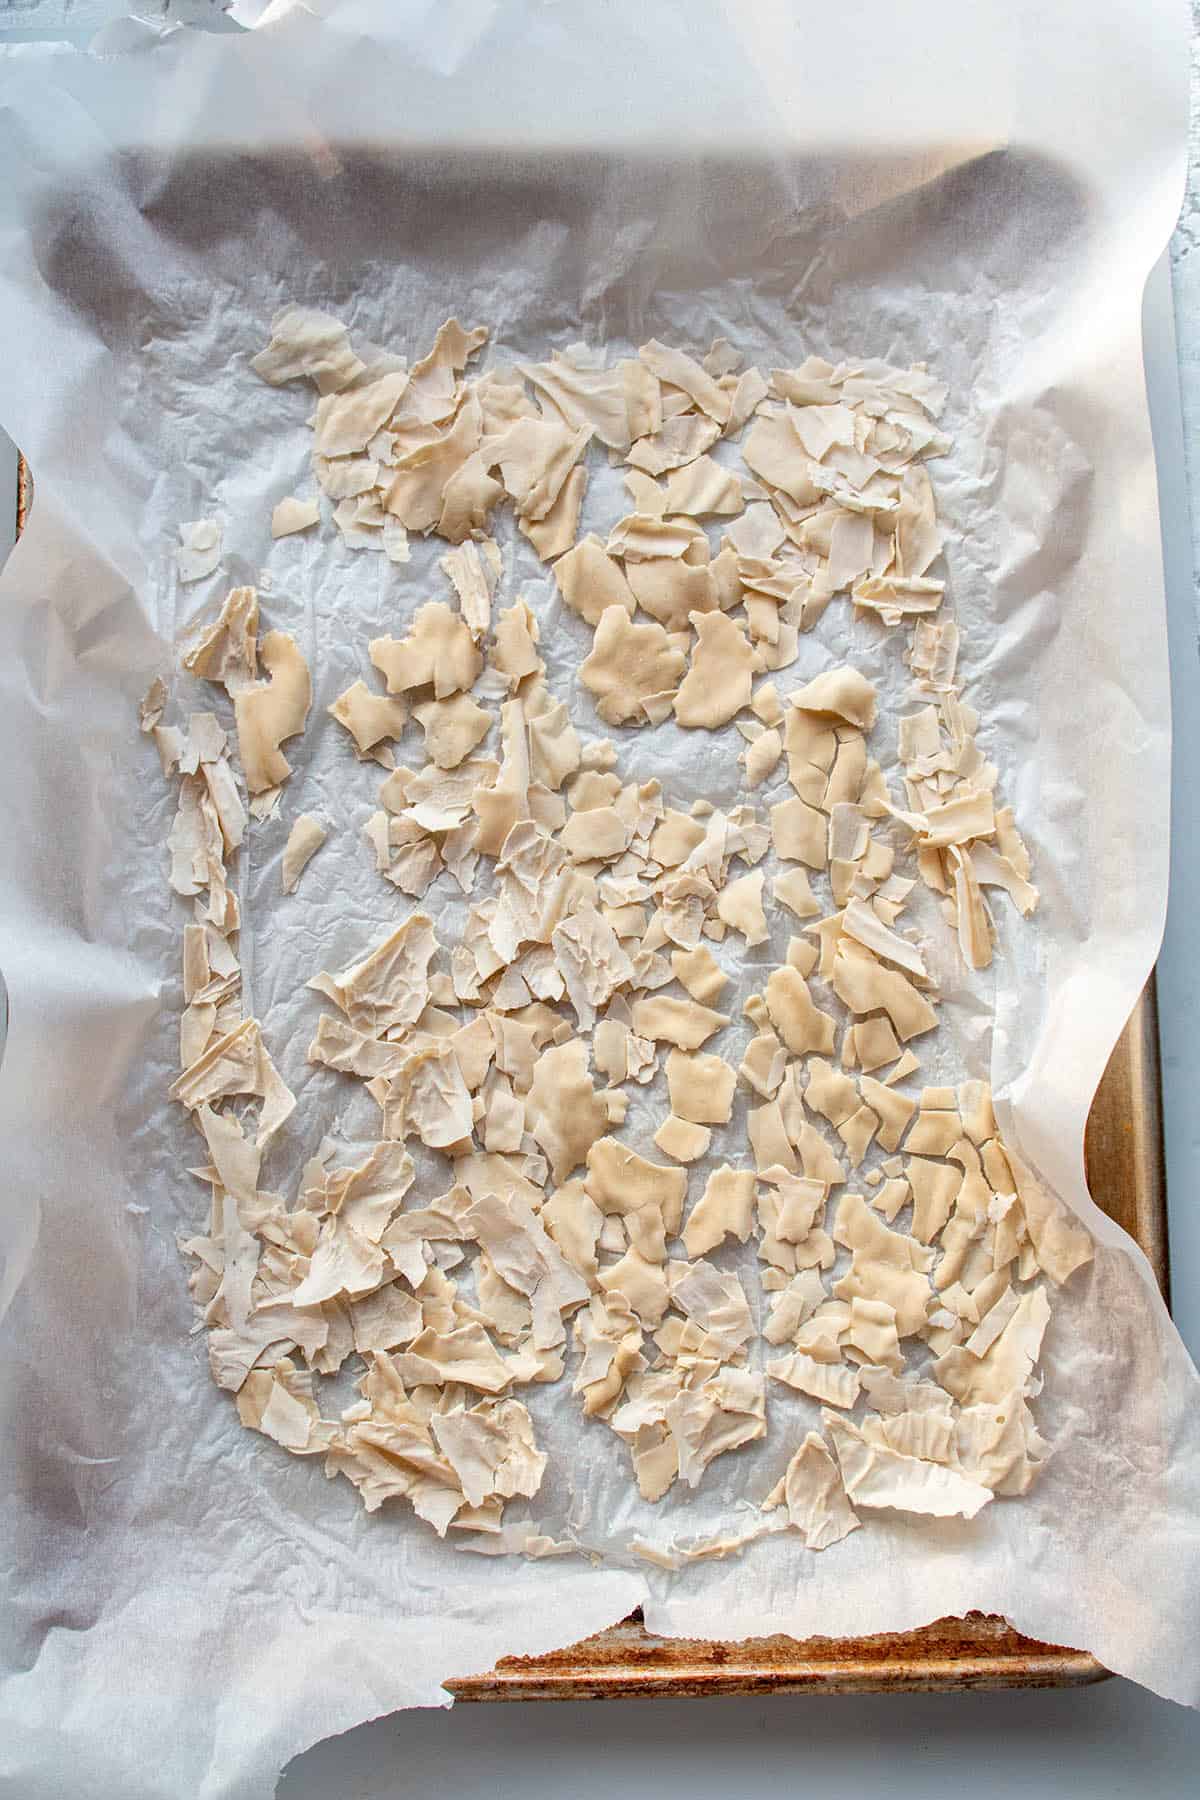 A baking sheet with parchment paper and dehydrated sourdough starter.